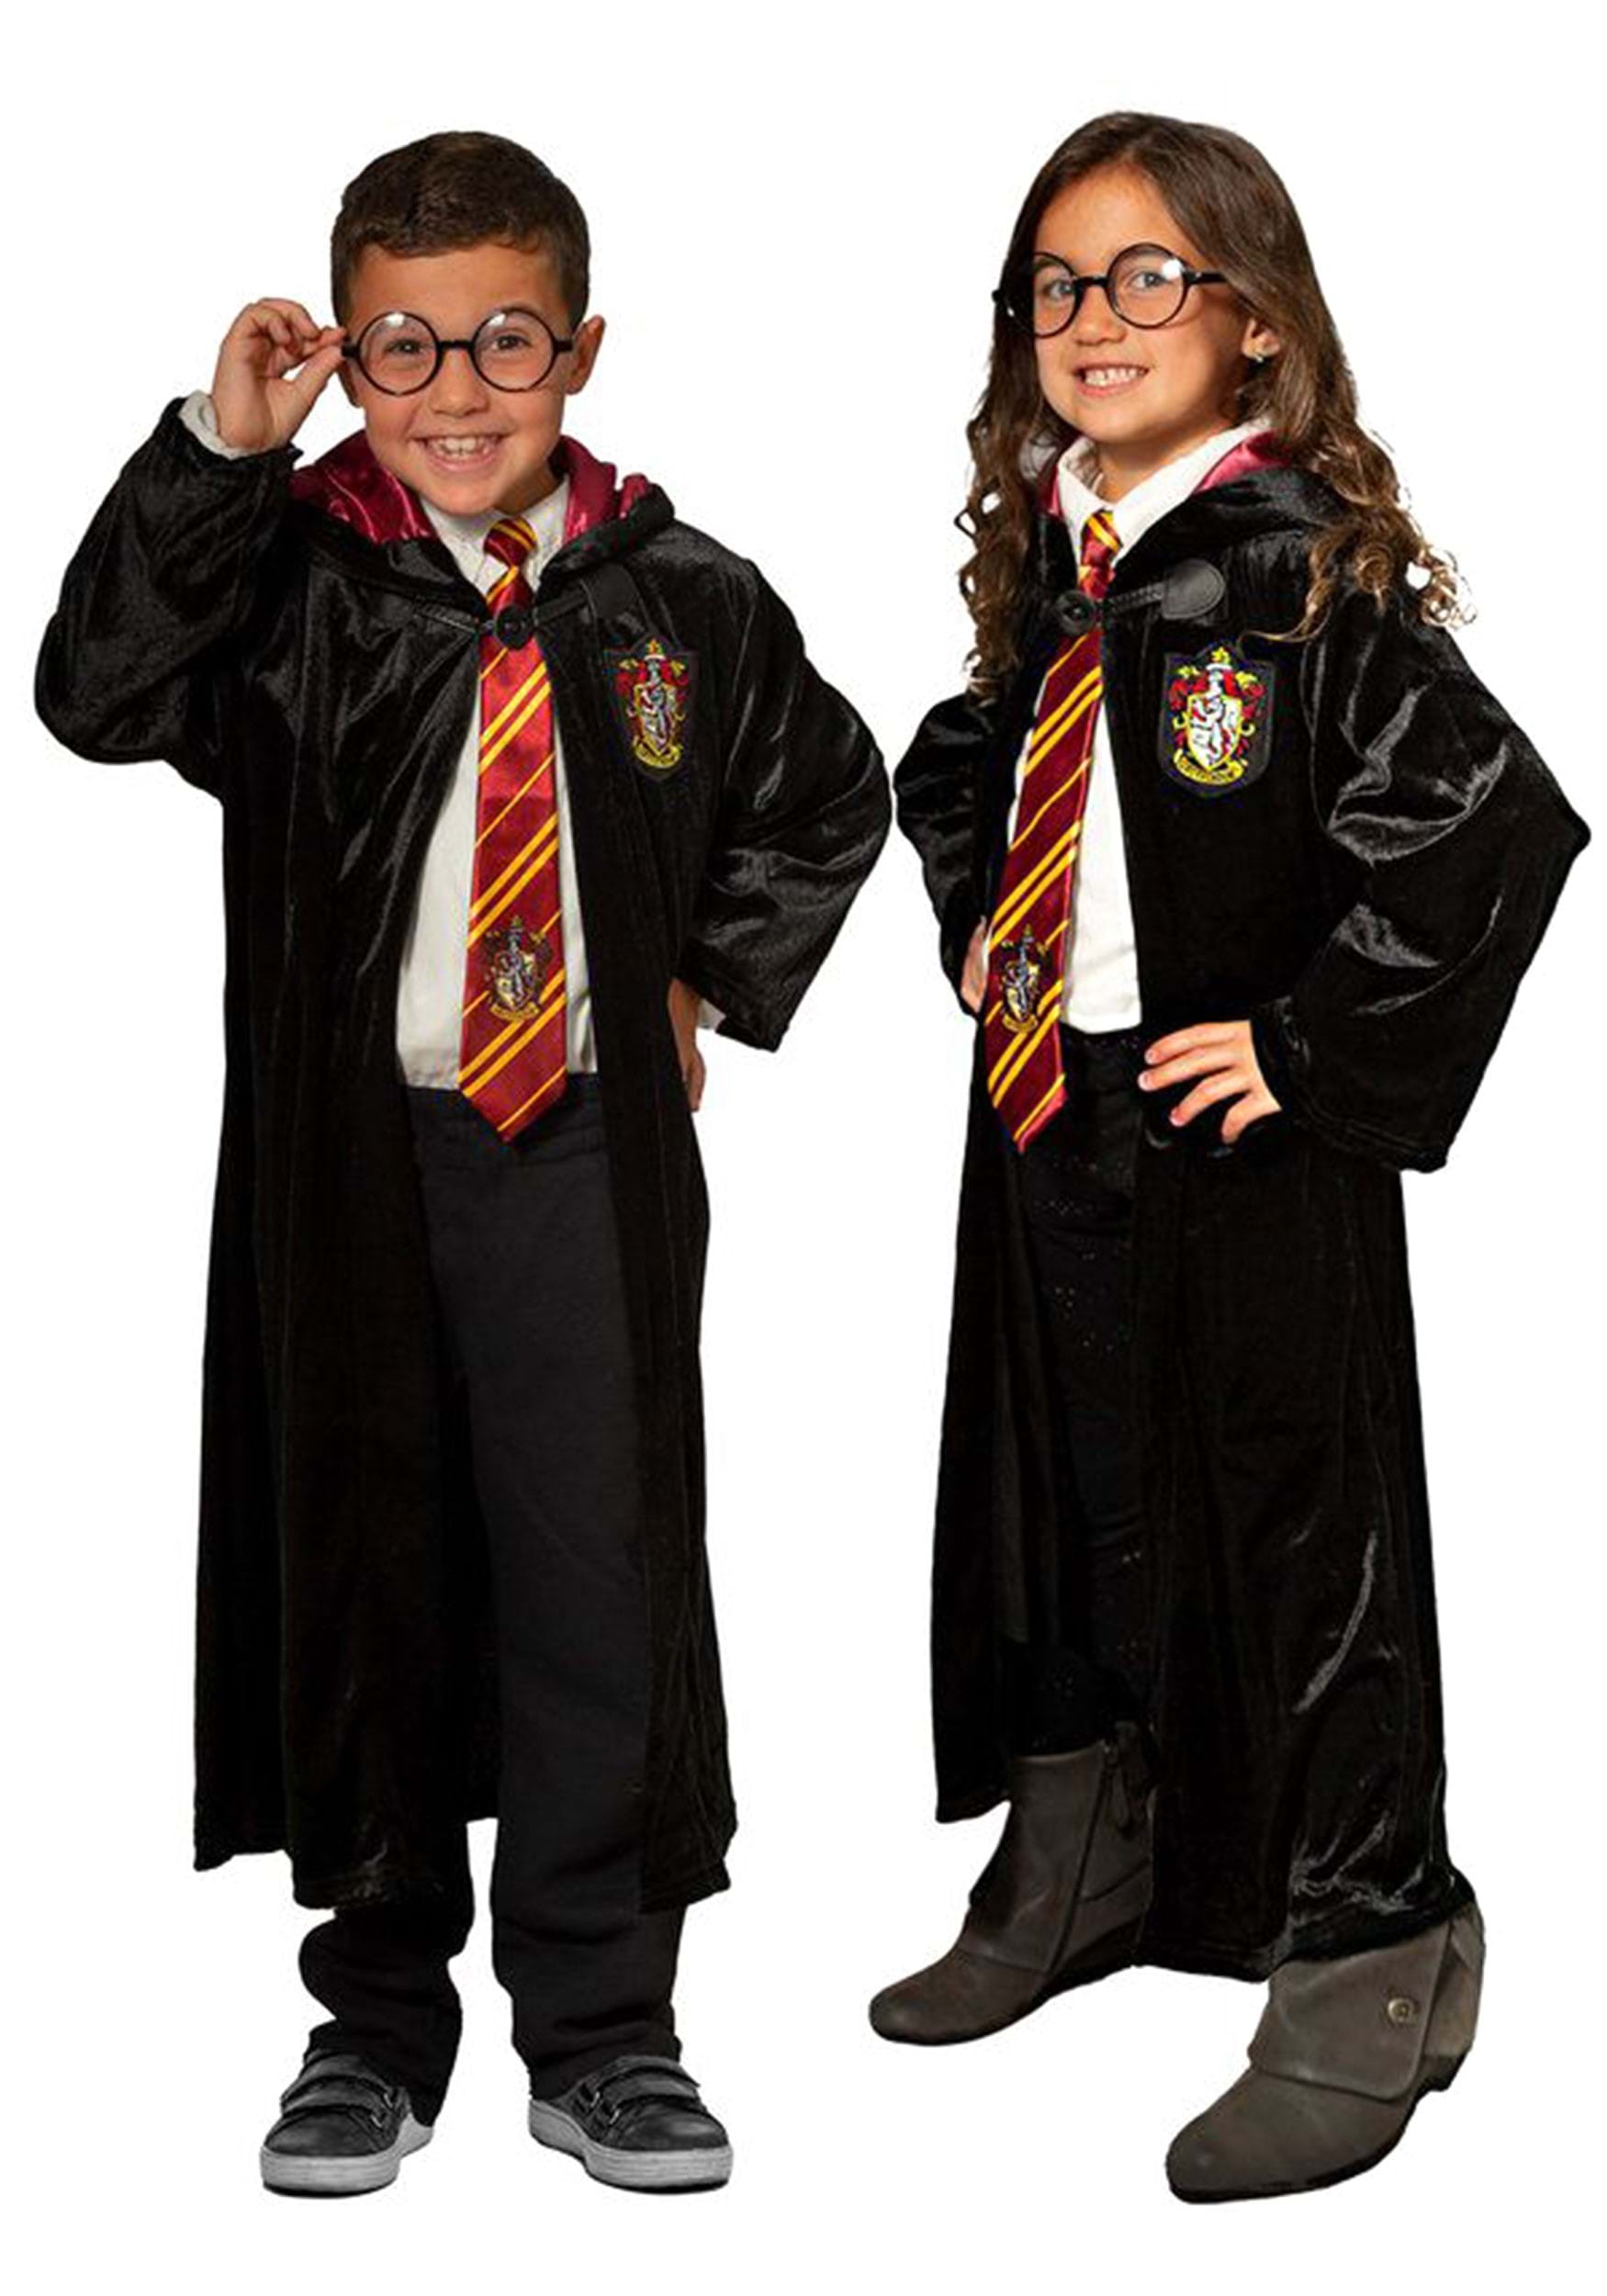 Child Deluxe Robe & Accessory Set from Harry Potter | Kid's Harry Potter Costumes